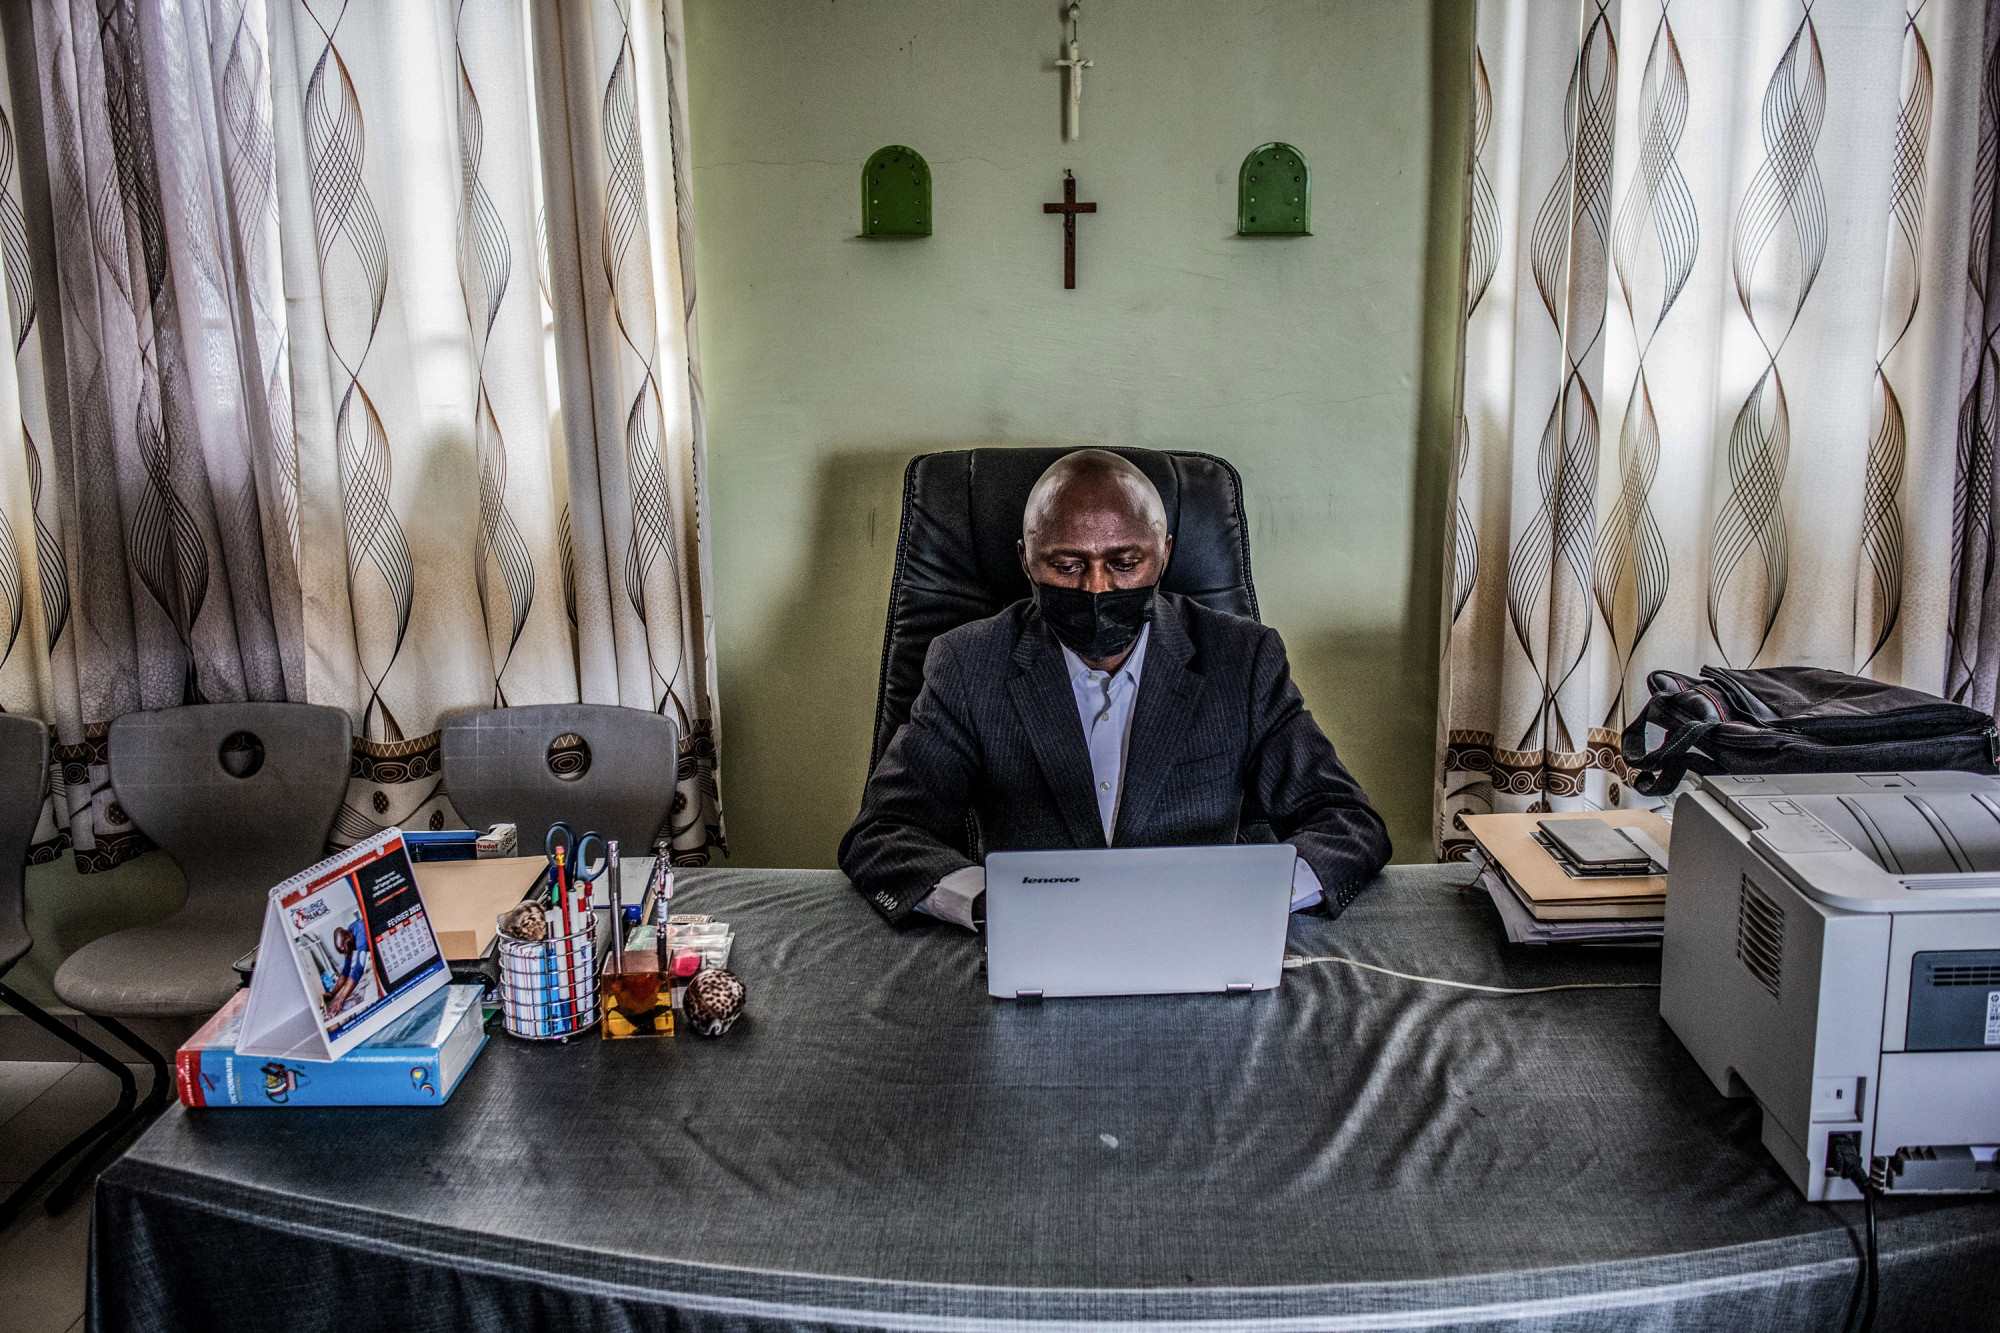 Goma, DRC, February 22nd 2021. Father Jacques Letakamba sits in his office at the Mwanga Institute in the eastern Congolese city of Goma. © Moses Sawasawa for Fondation Carmignac